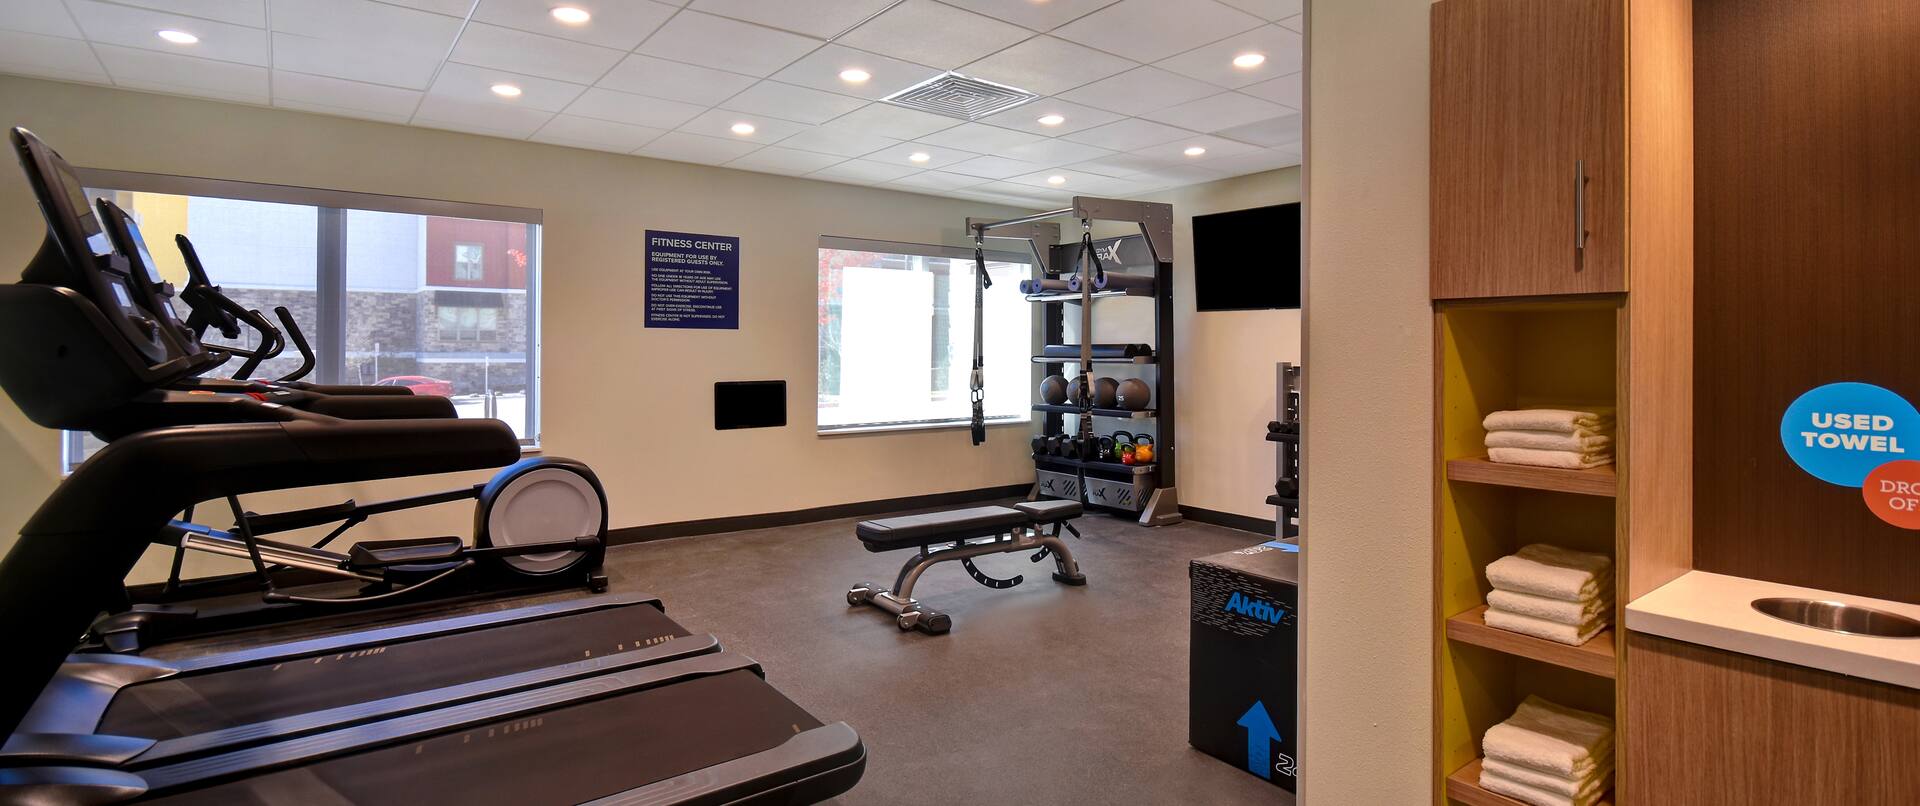 On-Site Fitness Center - Treadmills, Weight Bench, Towels